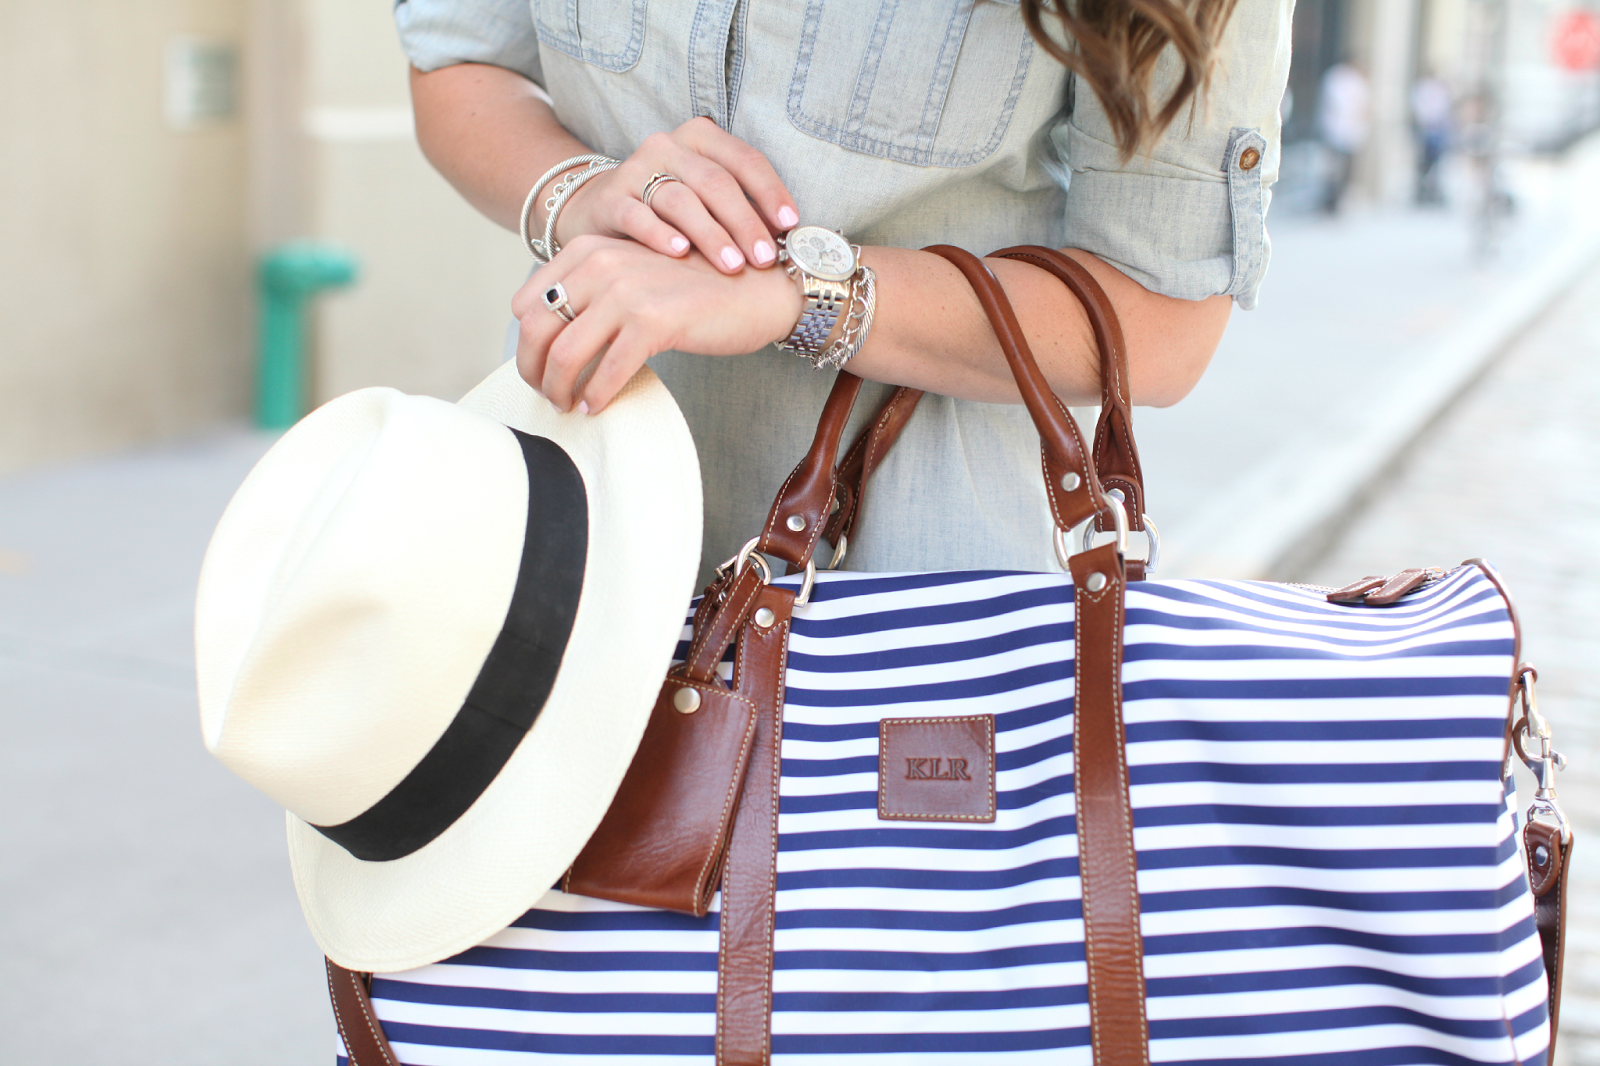 look cute while traveling, preppy blog, southern blog